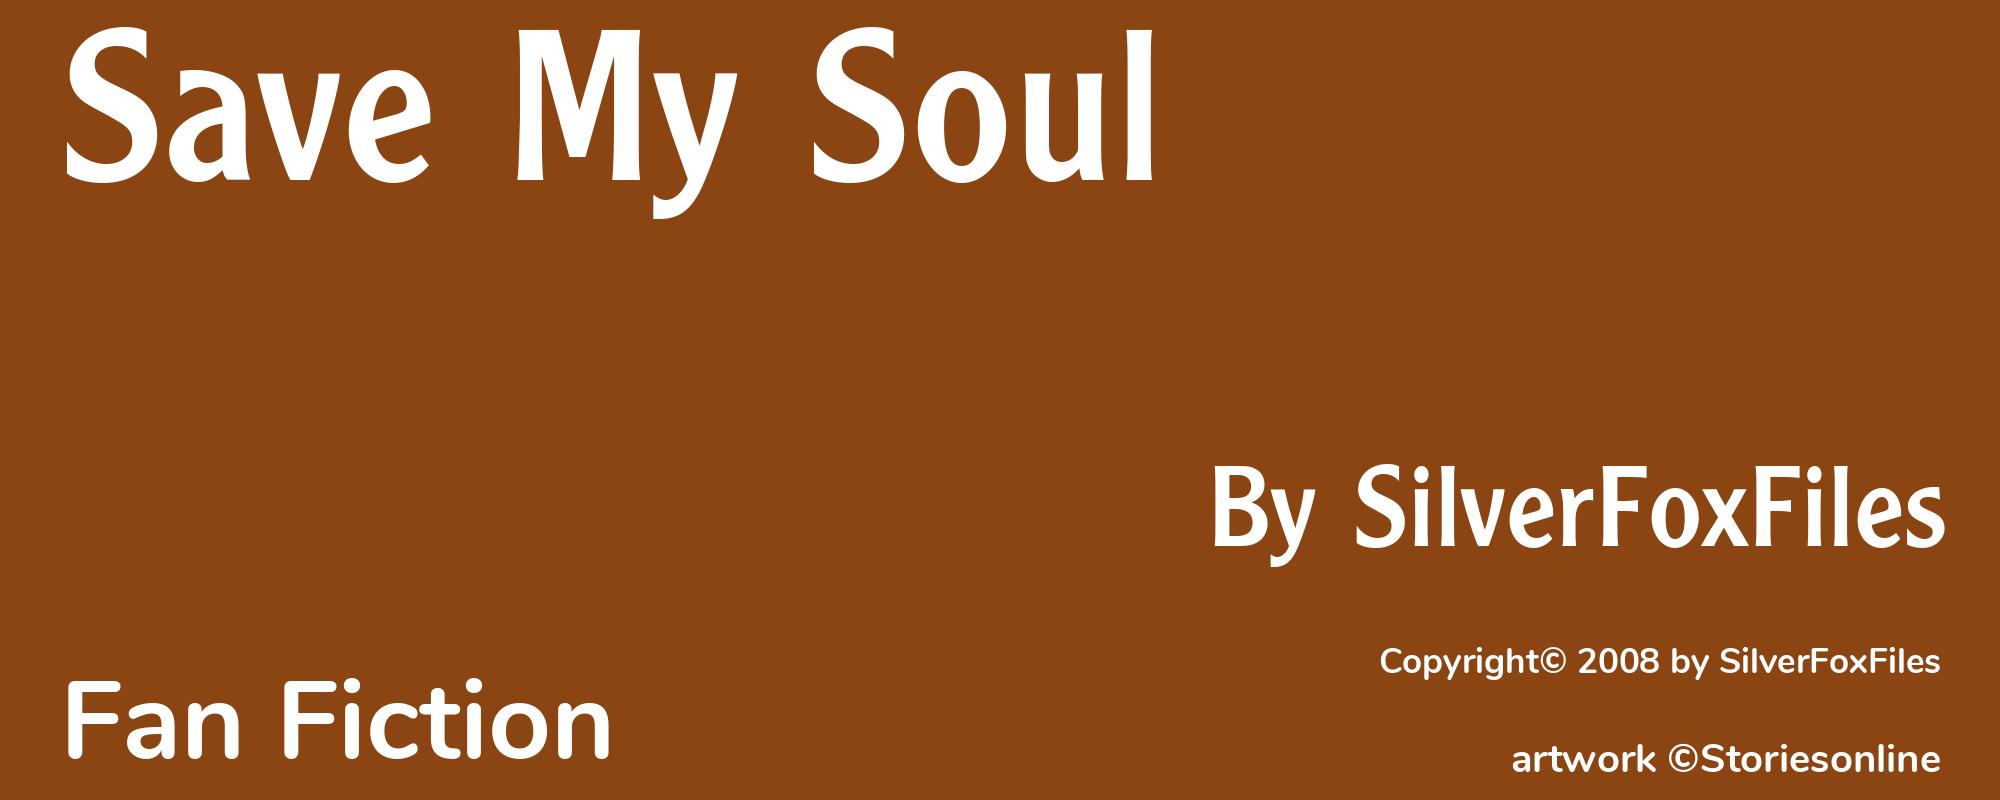 Save My Soul - Cover